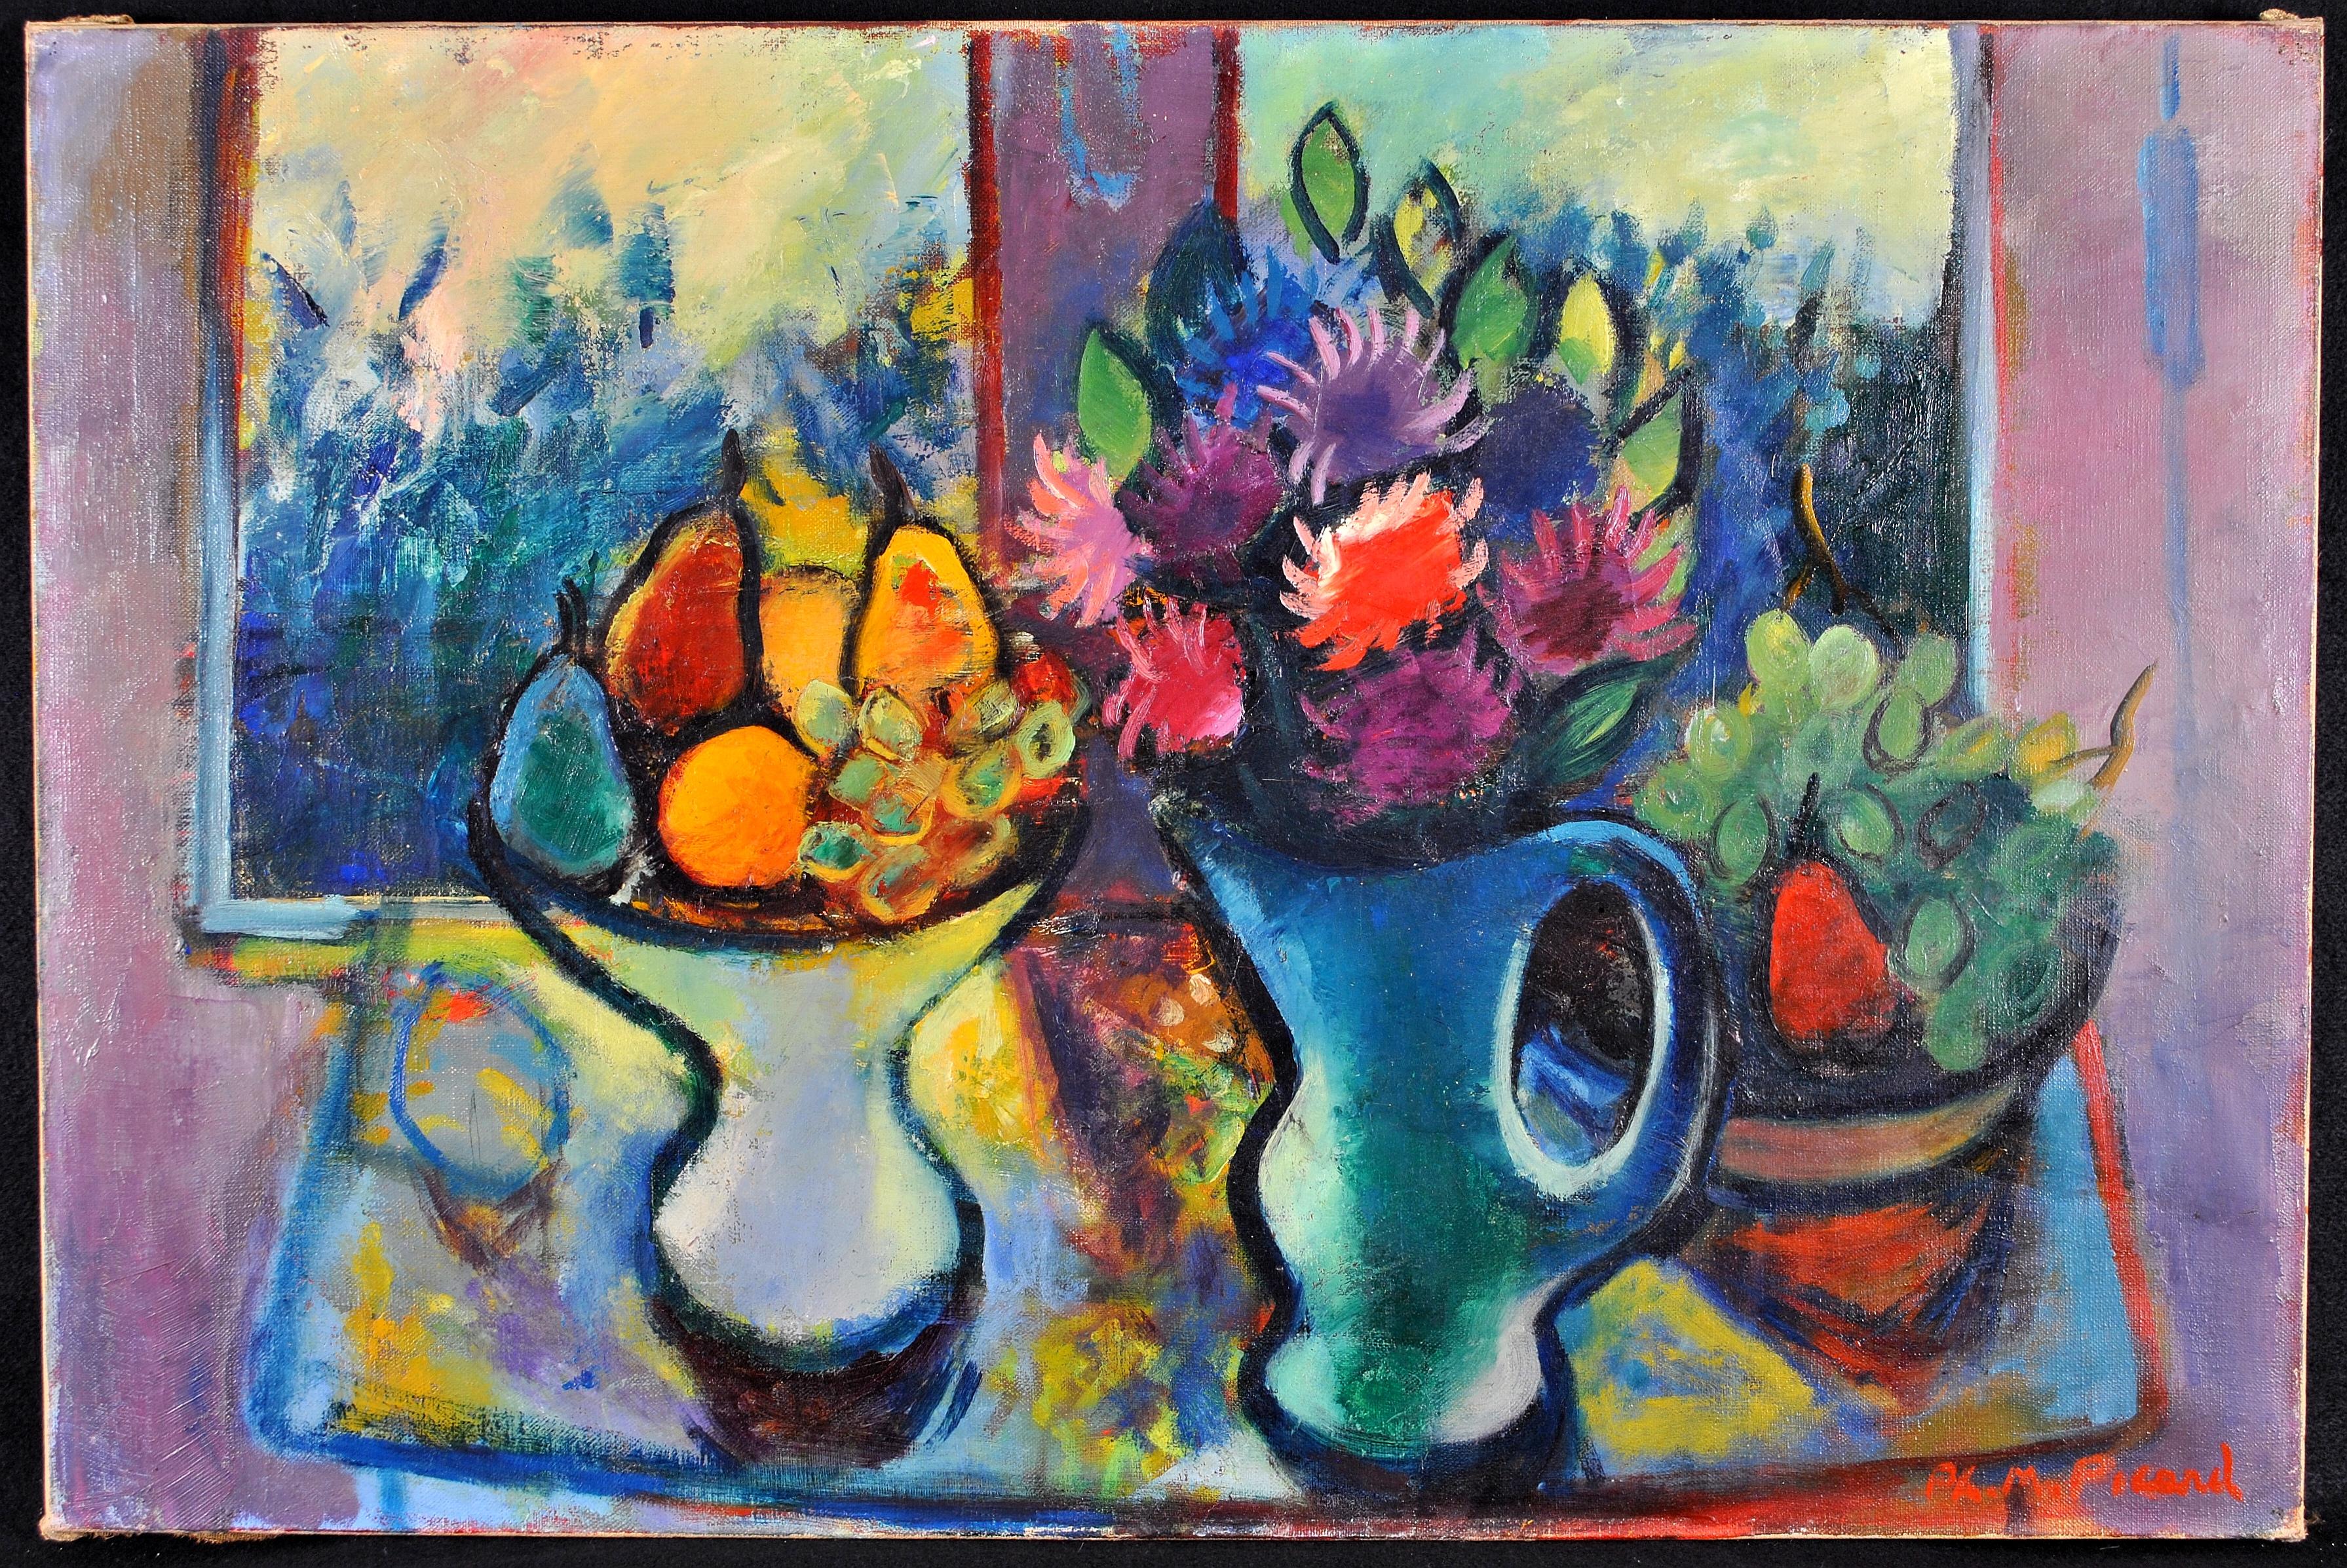 Flowers & Fruit in a Window - Large French Expressionist Still Life Painting